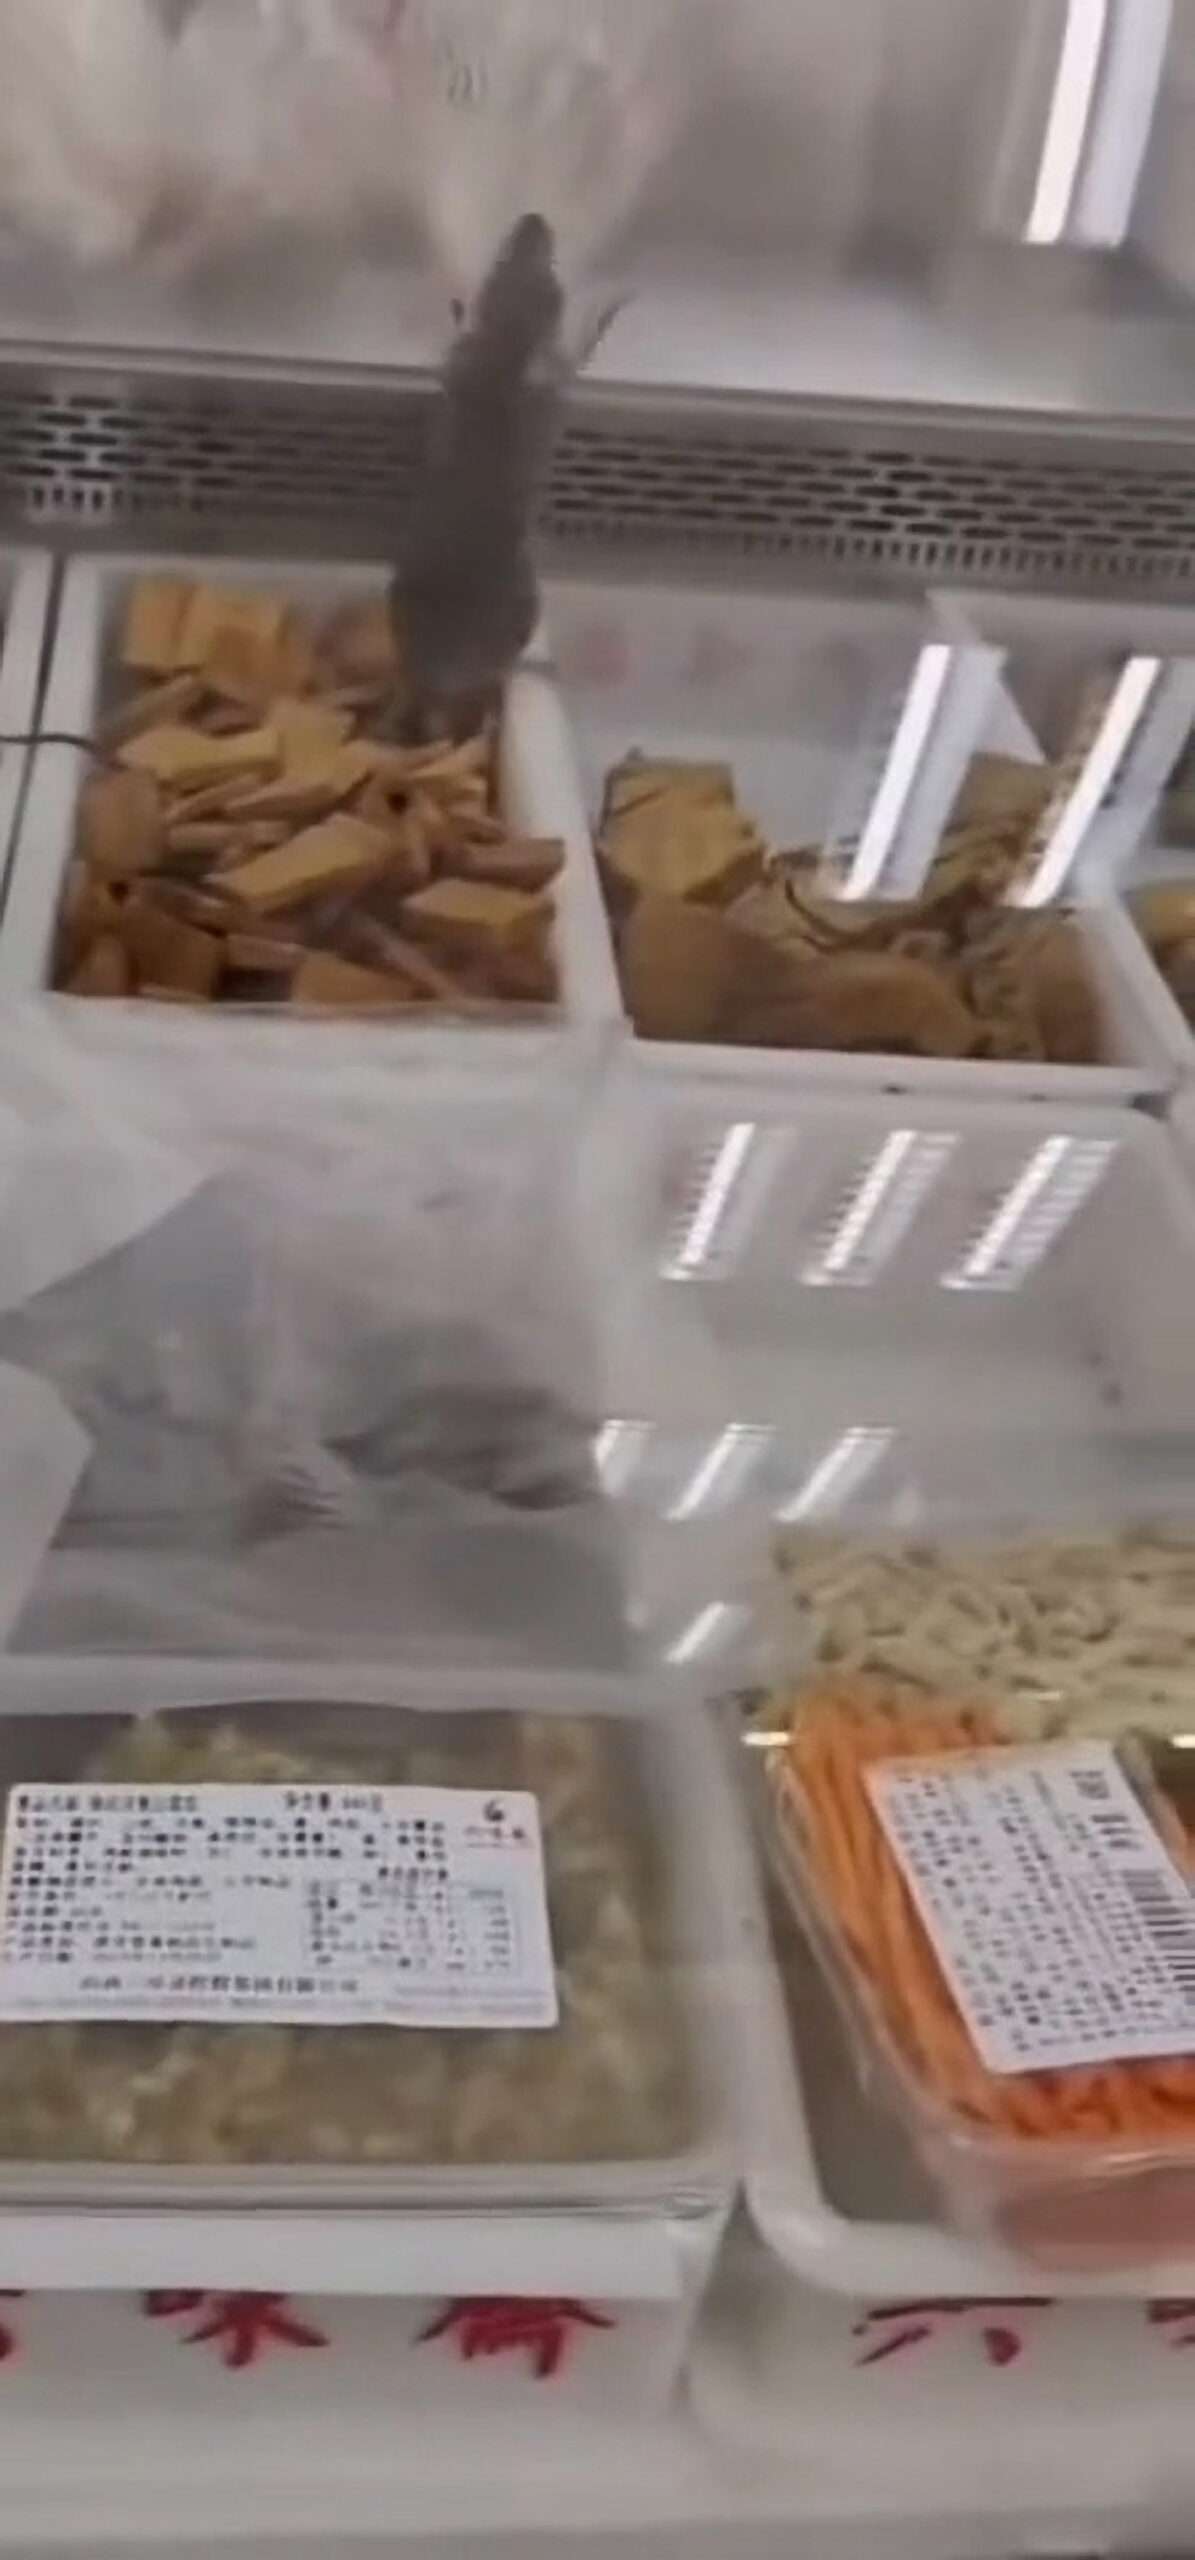 Read more about the article Large Rat Found In Rice Stand At Chain Supermarket